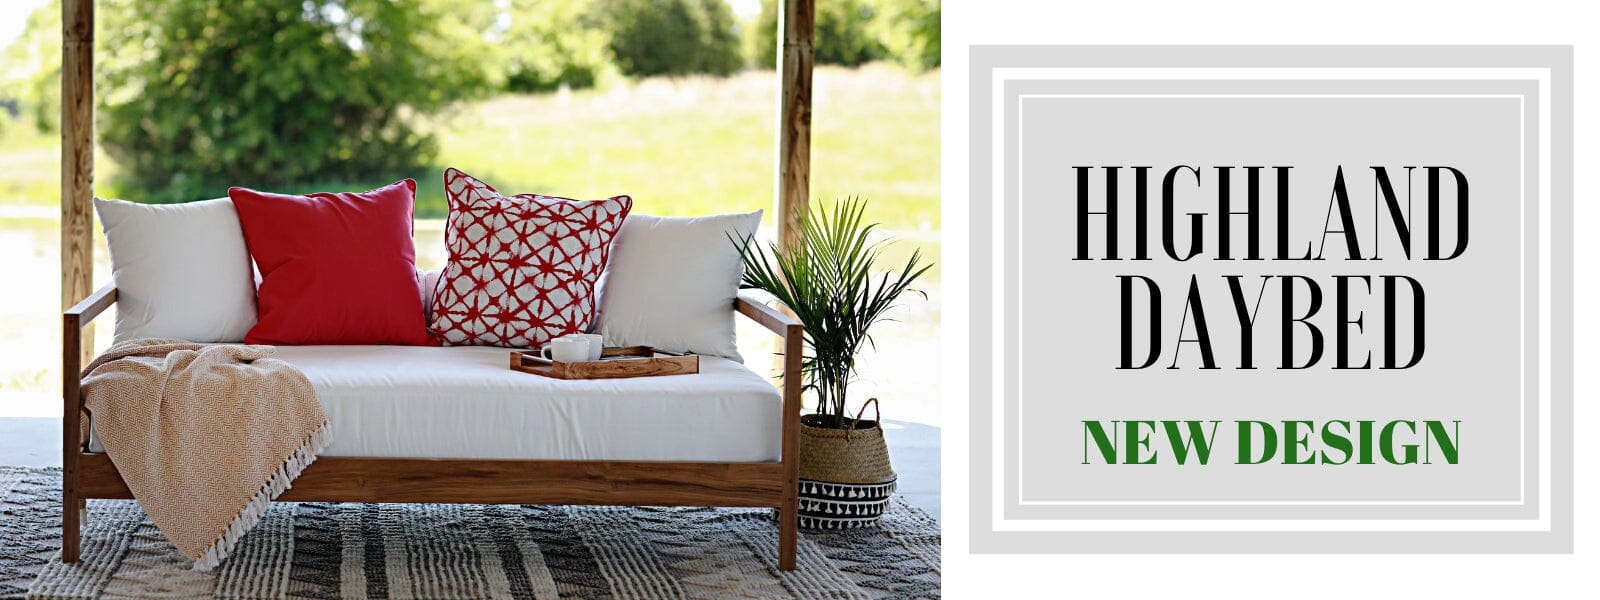 New Highland Teak Outdoor Daybed - Magnolia Porch Swings